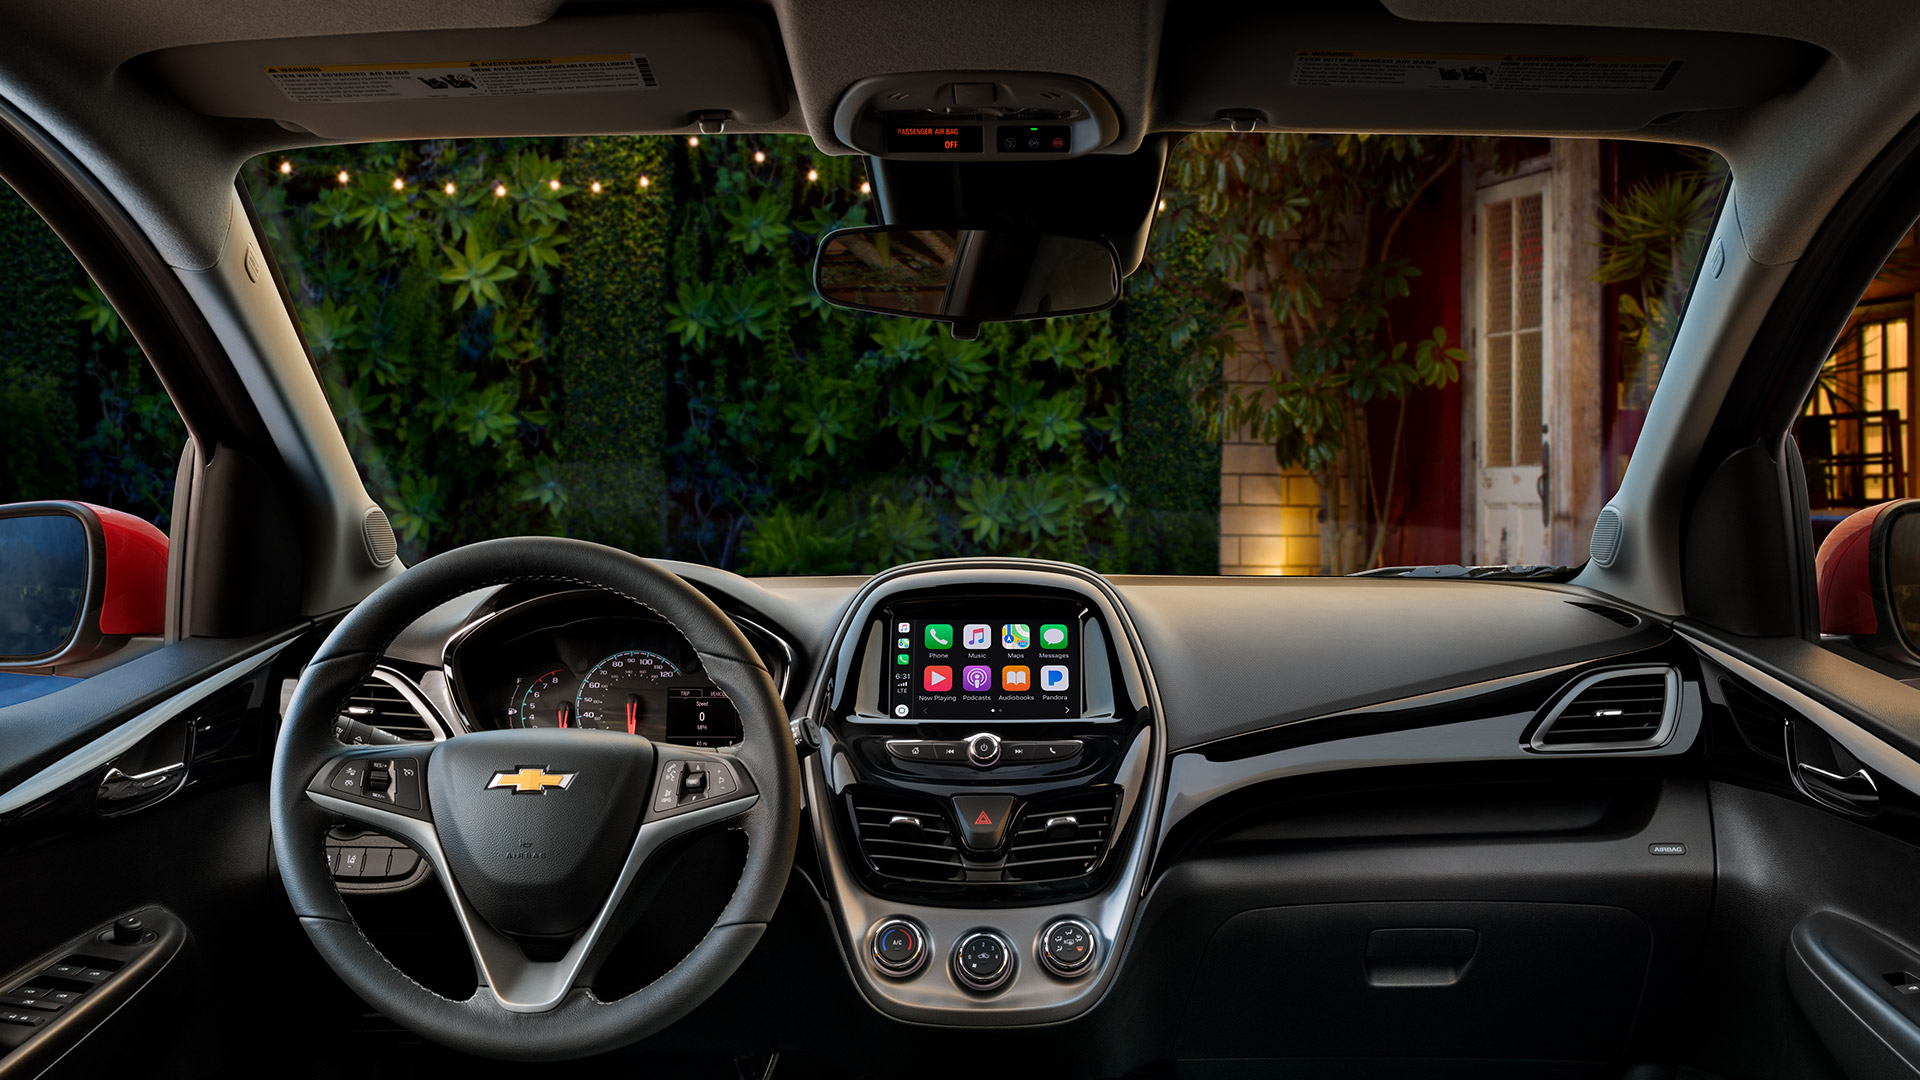 Apple Carplay and Android Auto Compatibility in Spark